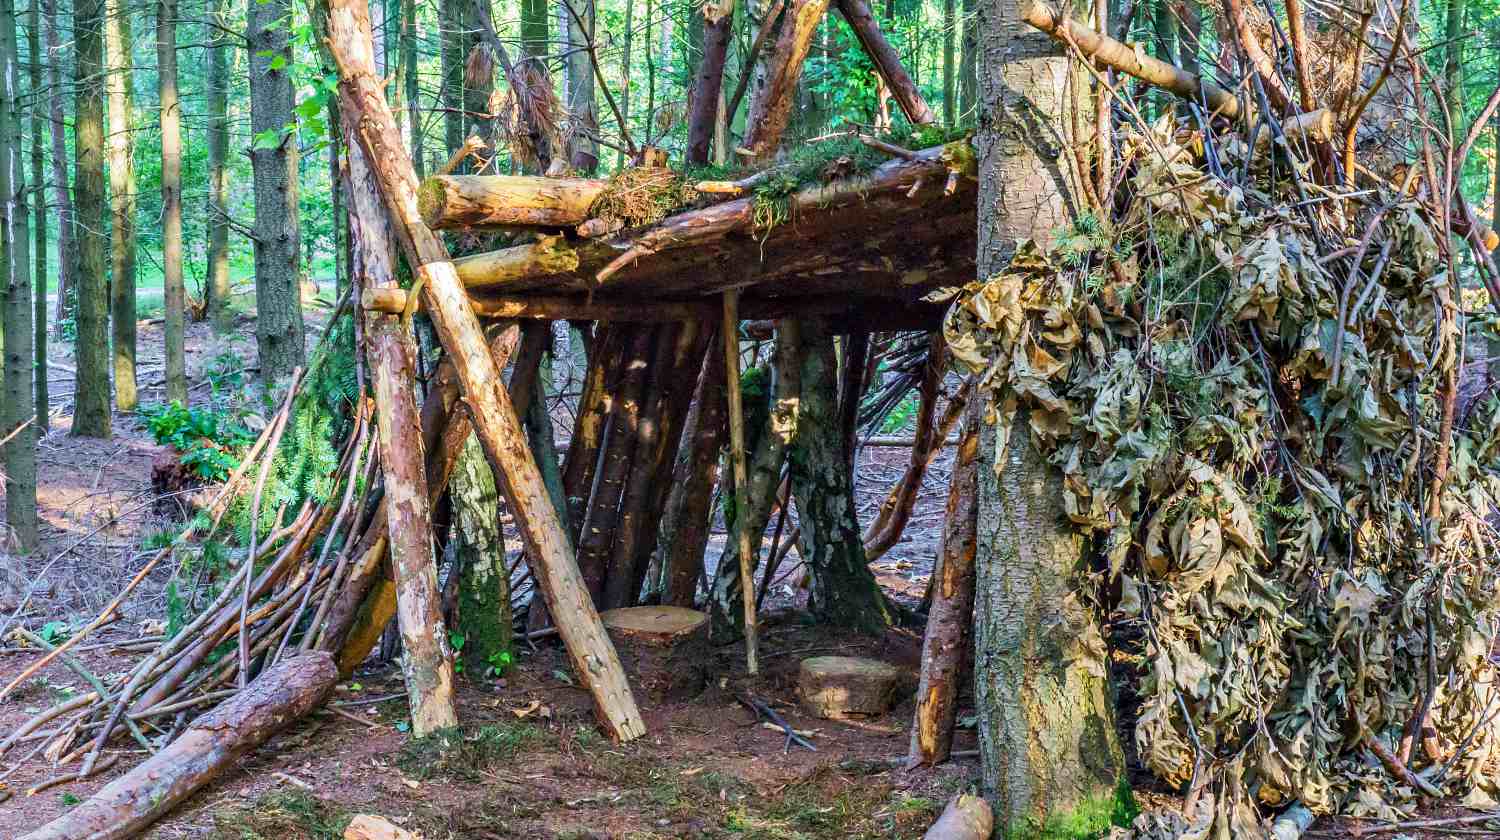 Featured | Self build tree hut of branches and leaves with seats | How To Build A Wickiup Survival Shelter